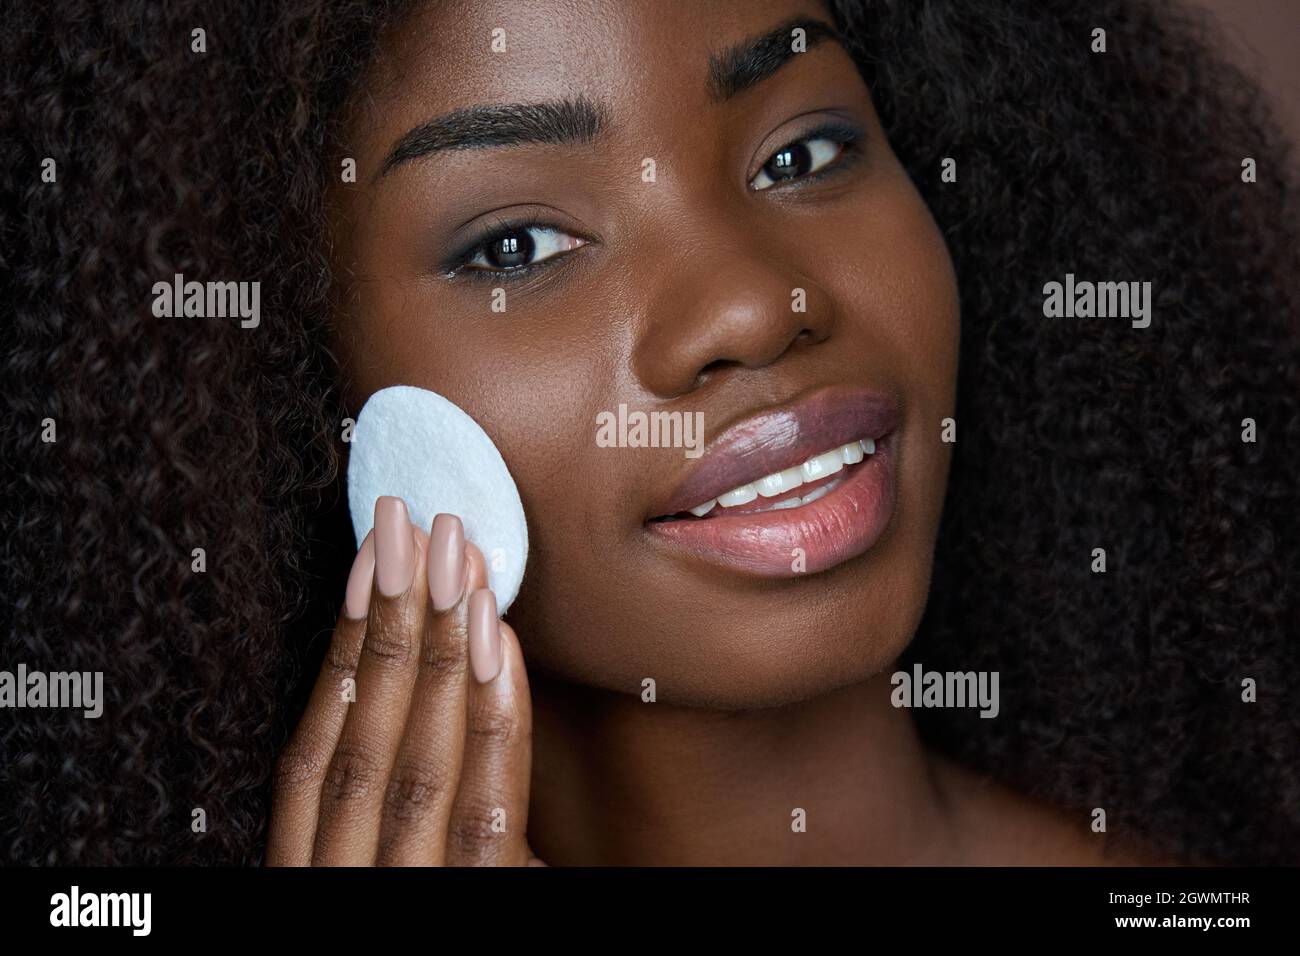 Black young woman holding cotton pad removing face make up with makeup remover. Stock Photo